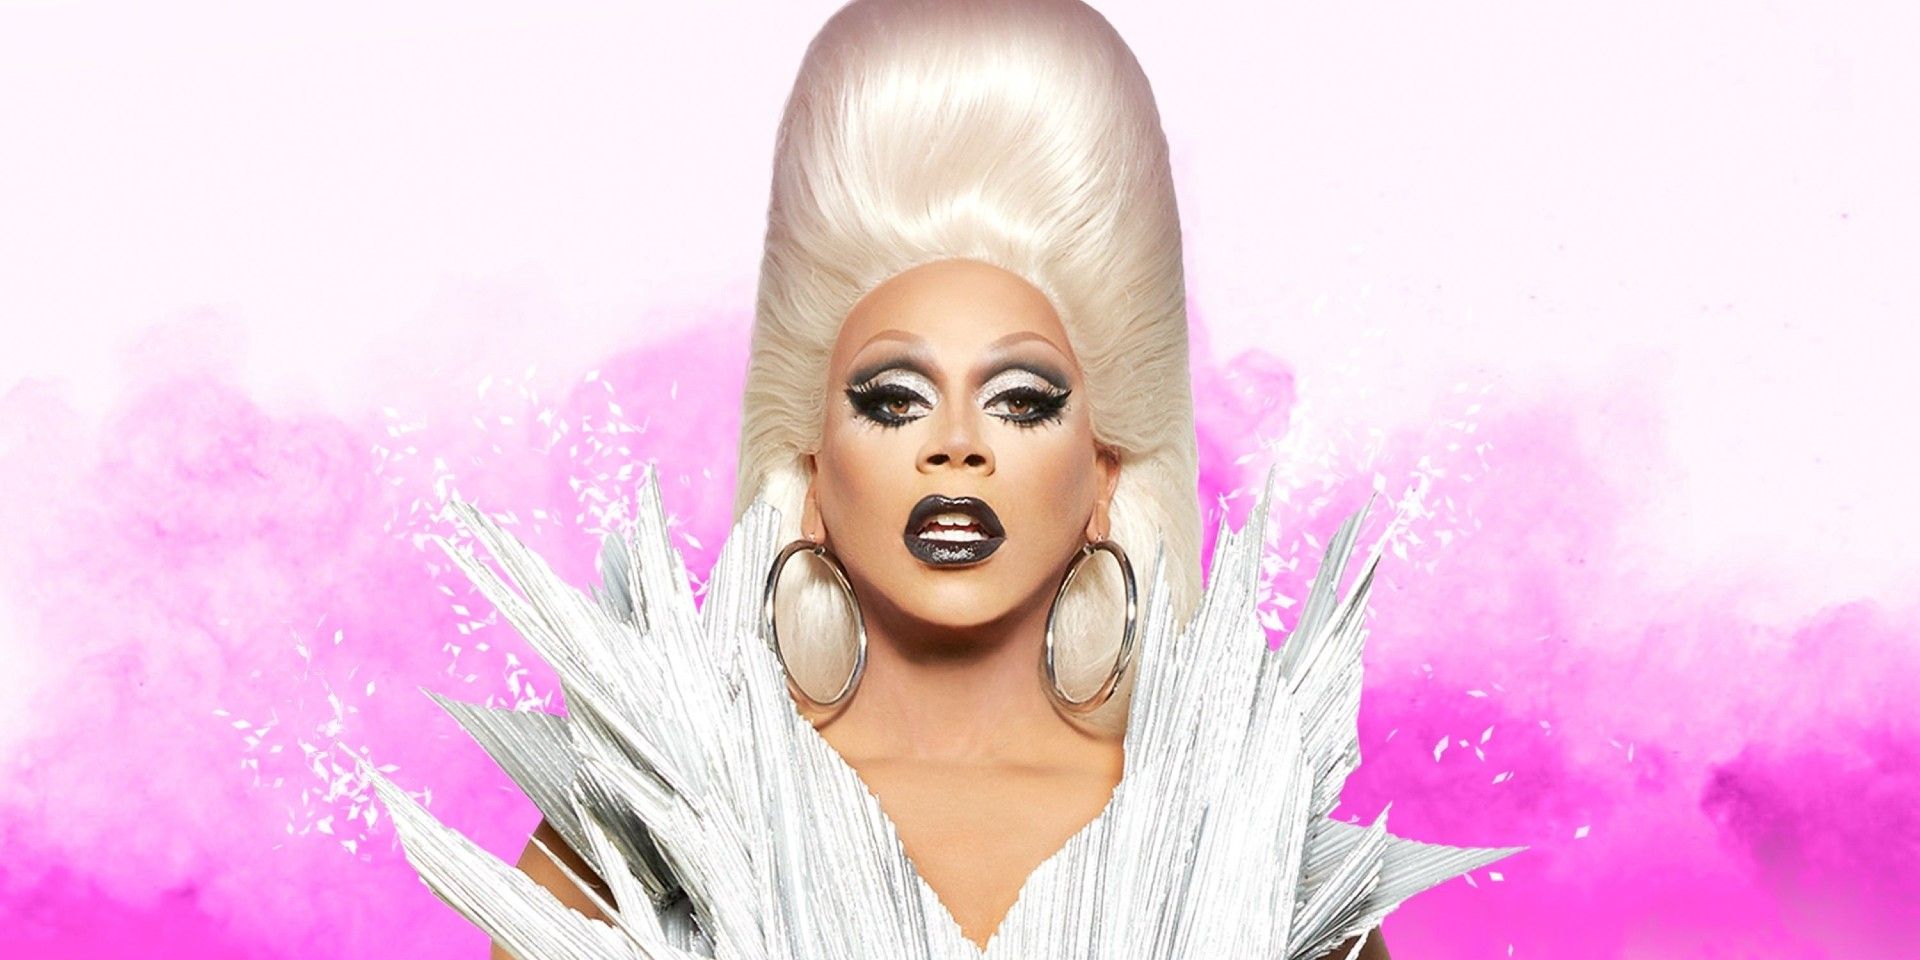 A promotional image for RuPaul's Drag Race featuring RuPaul